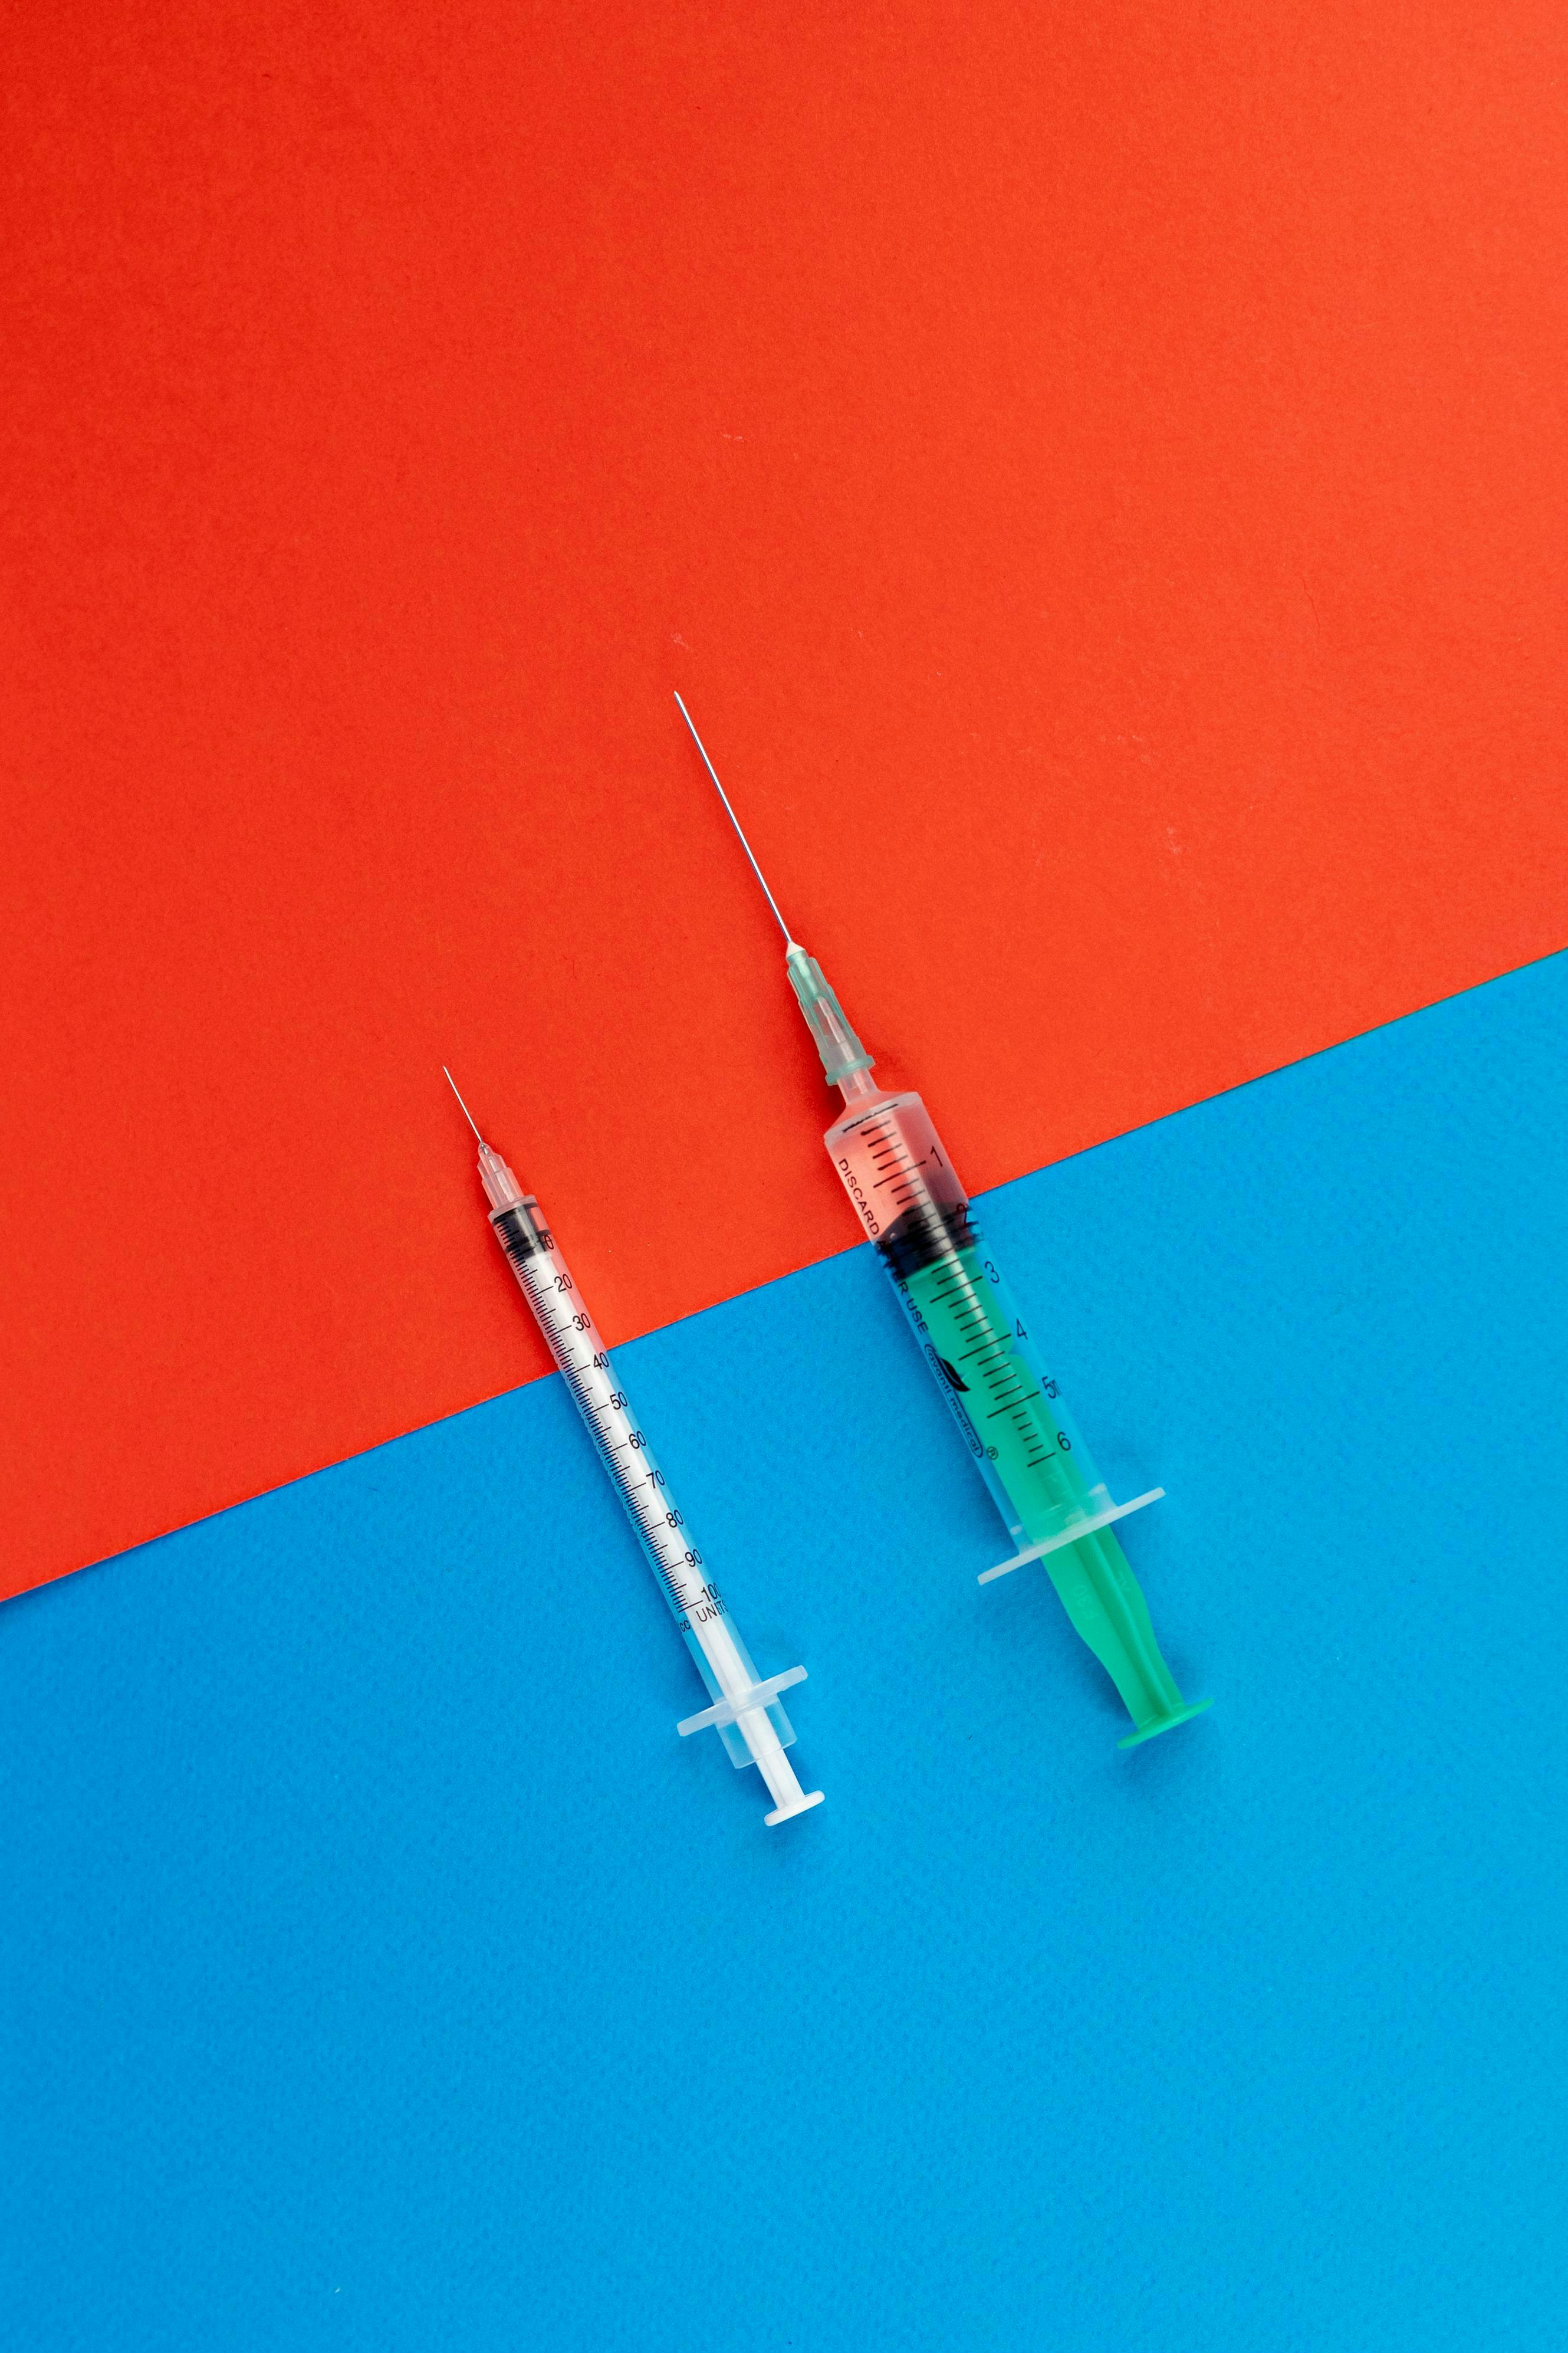 Staged photo of two syringes on flat surface.